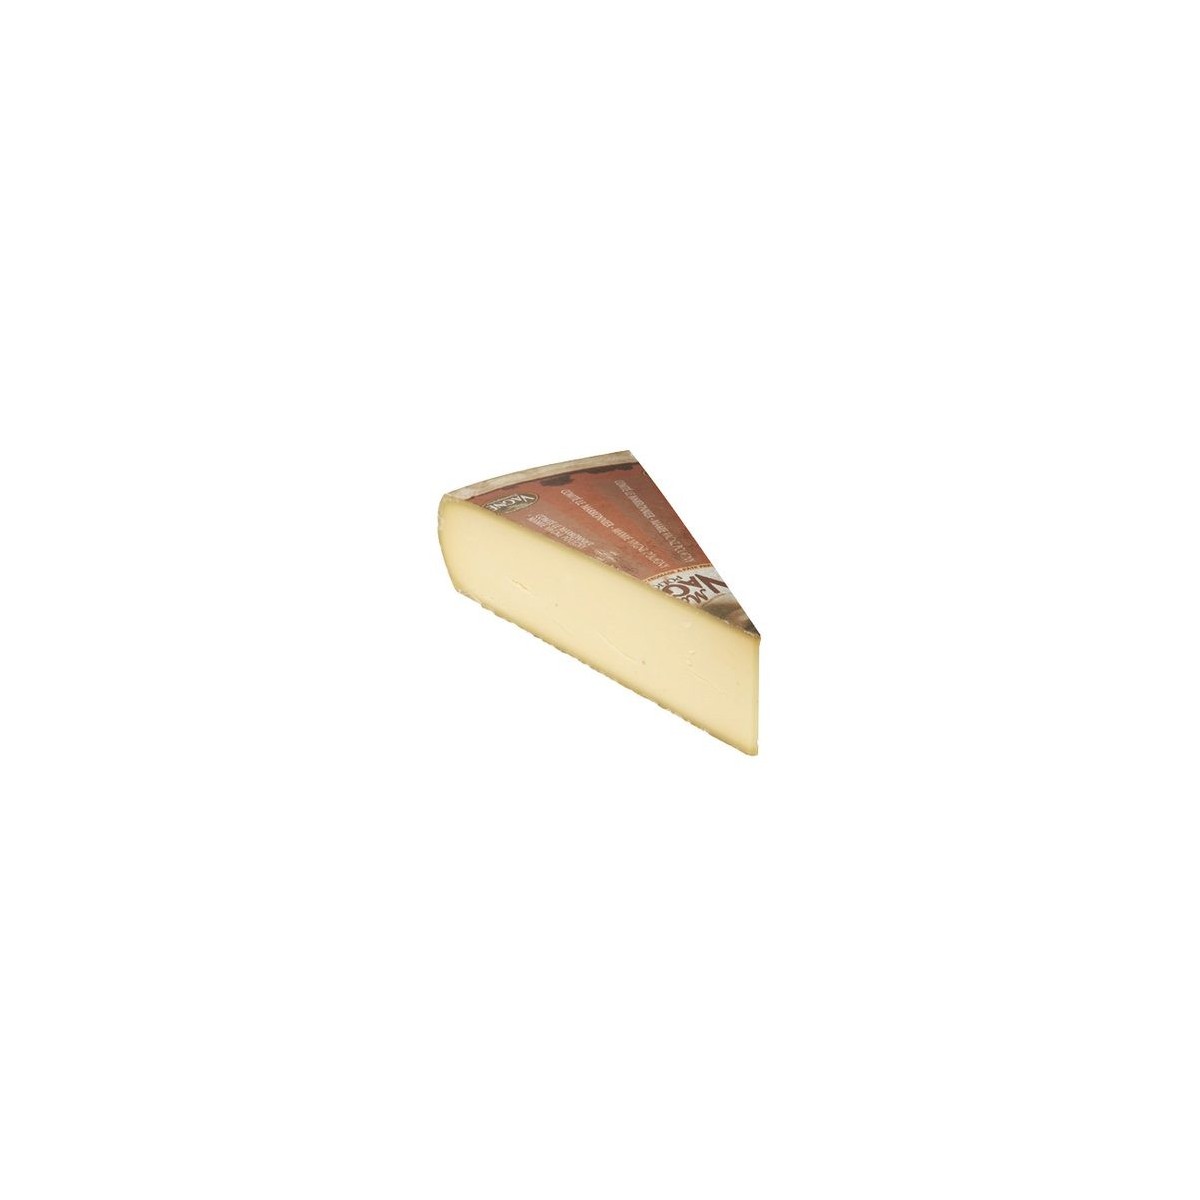 FROMAGE COMTE EN BLOC EXTRA POINTE +-3,5KGPOIDS VARIABLE S/CDE